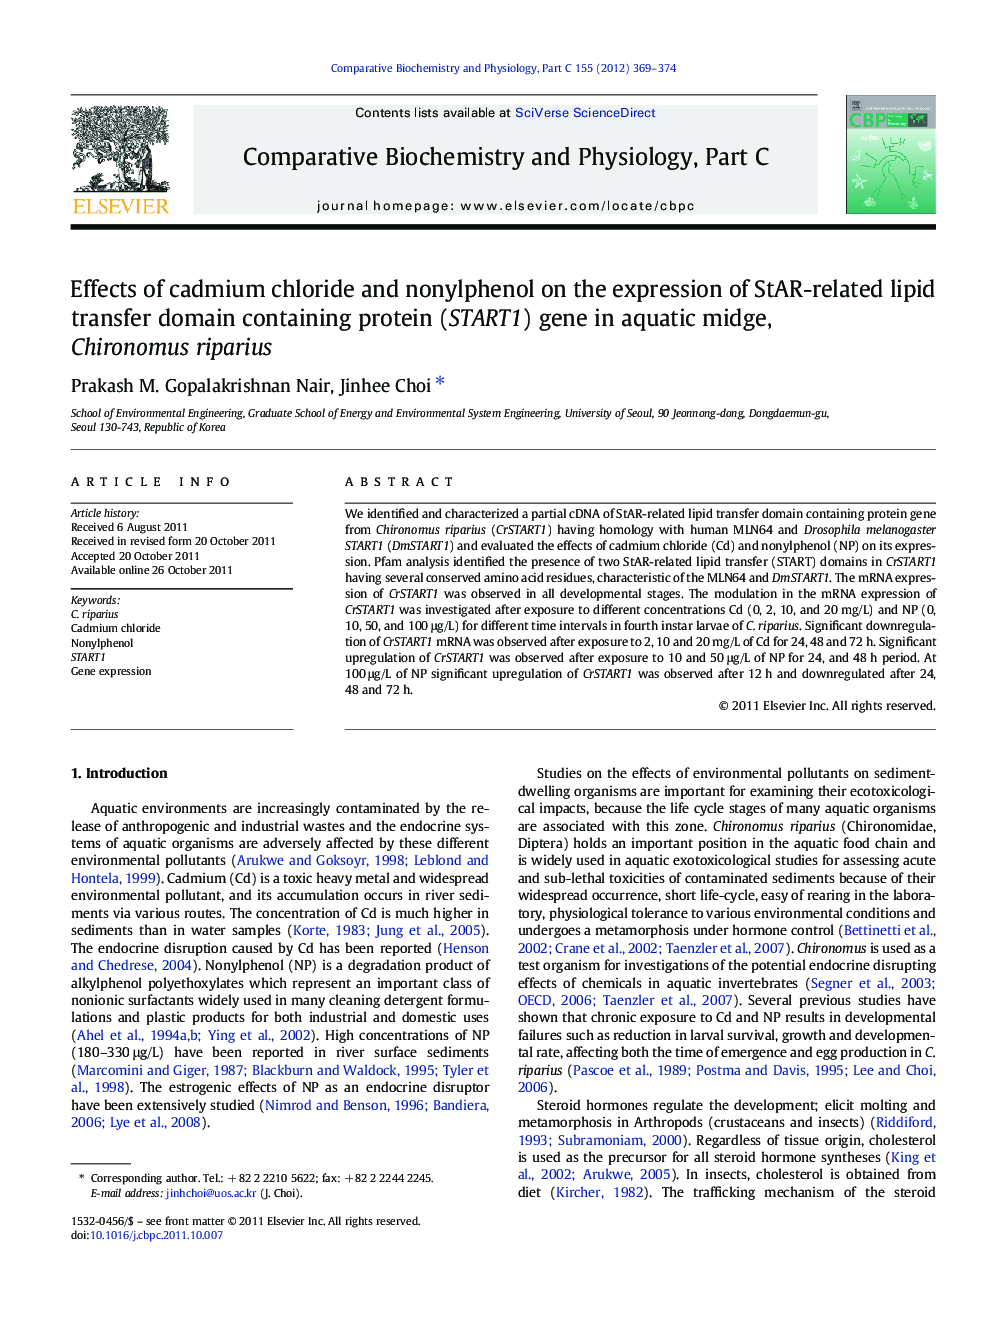 Effects of cadmium chloride and nonylphenol on the expression of StAR-related lipid transfer domain containing protein (START1) gene in aquatic midge, Chironomus riparius